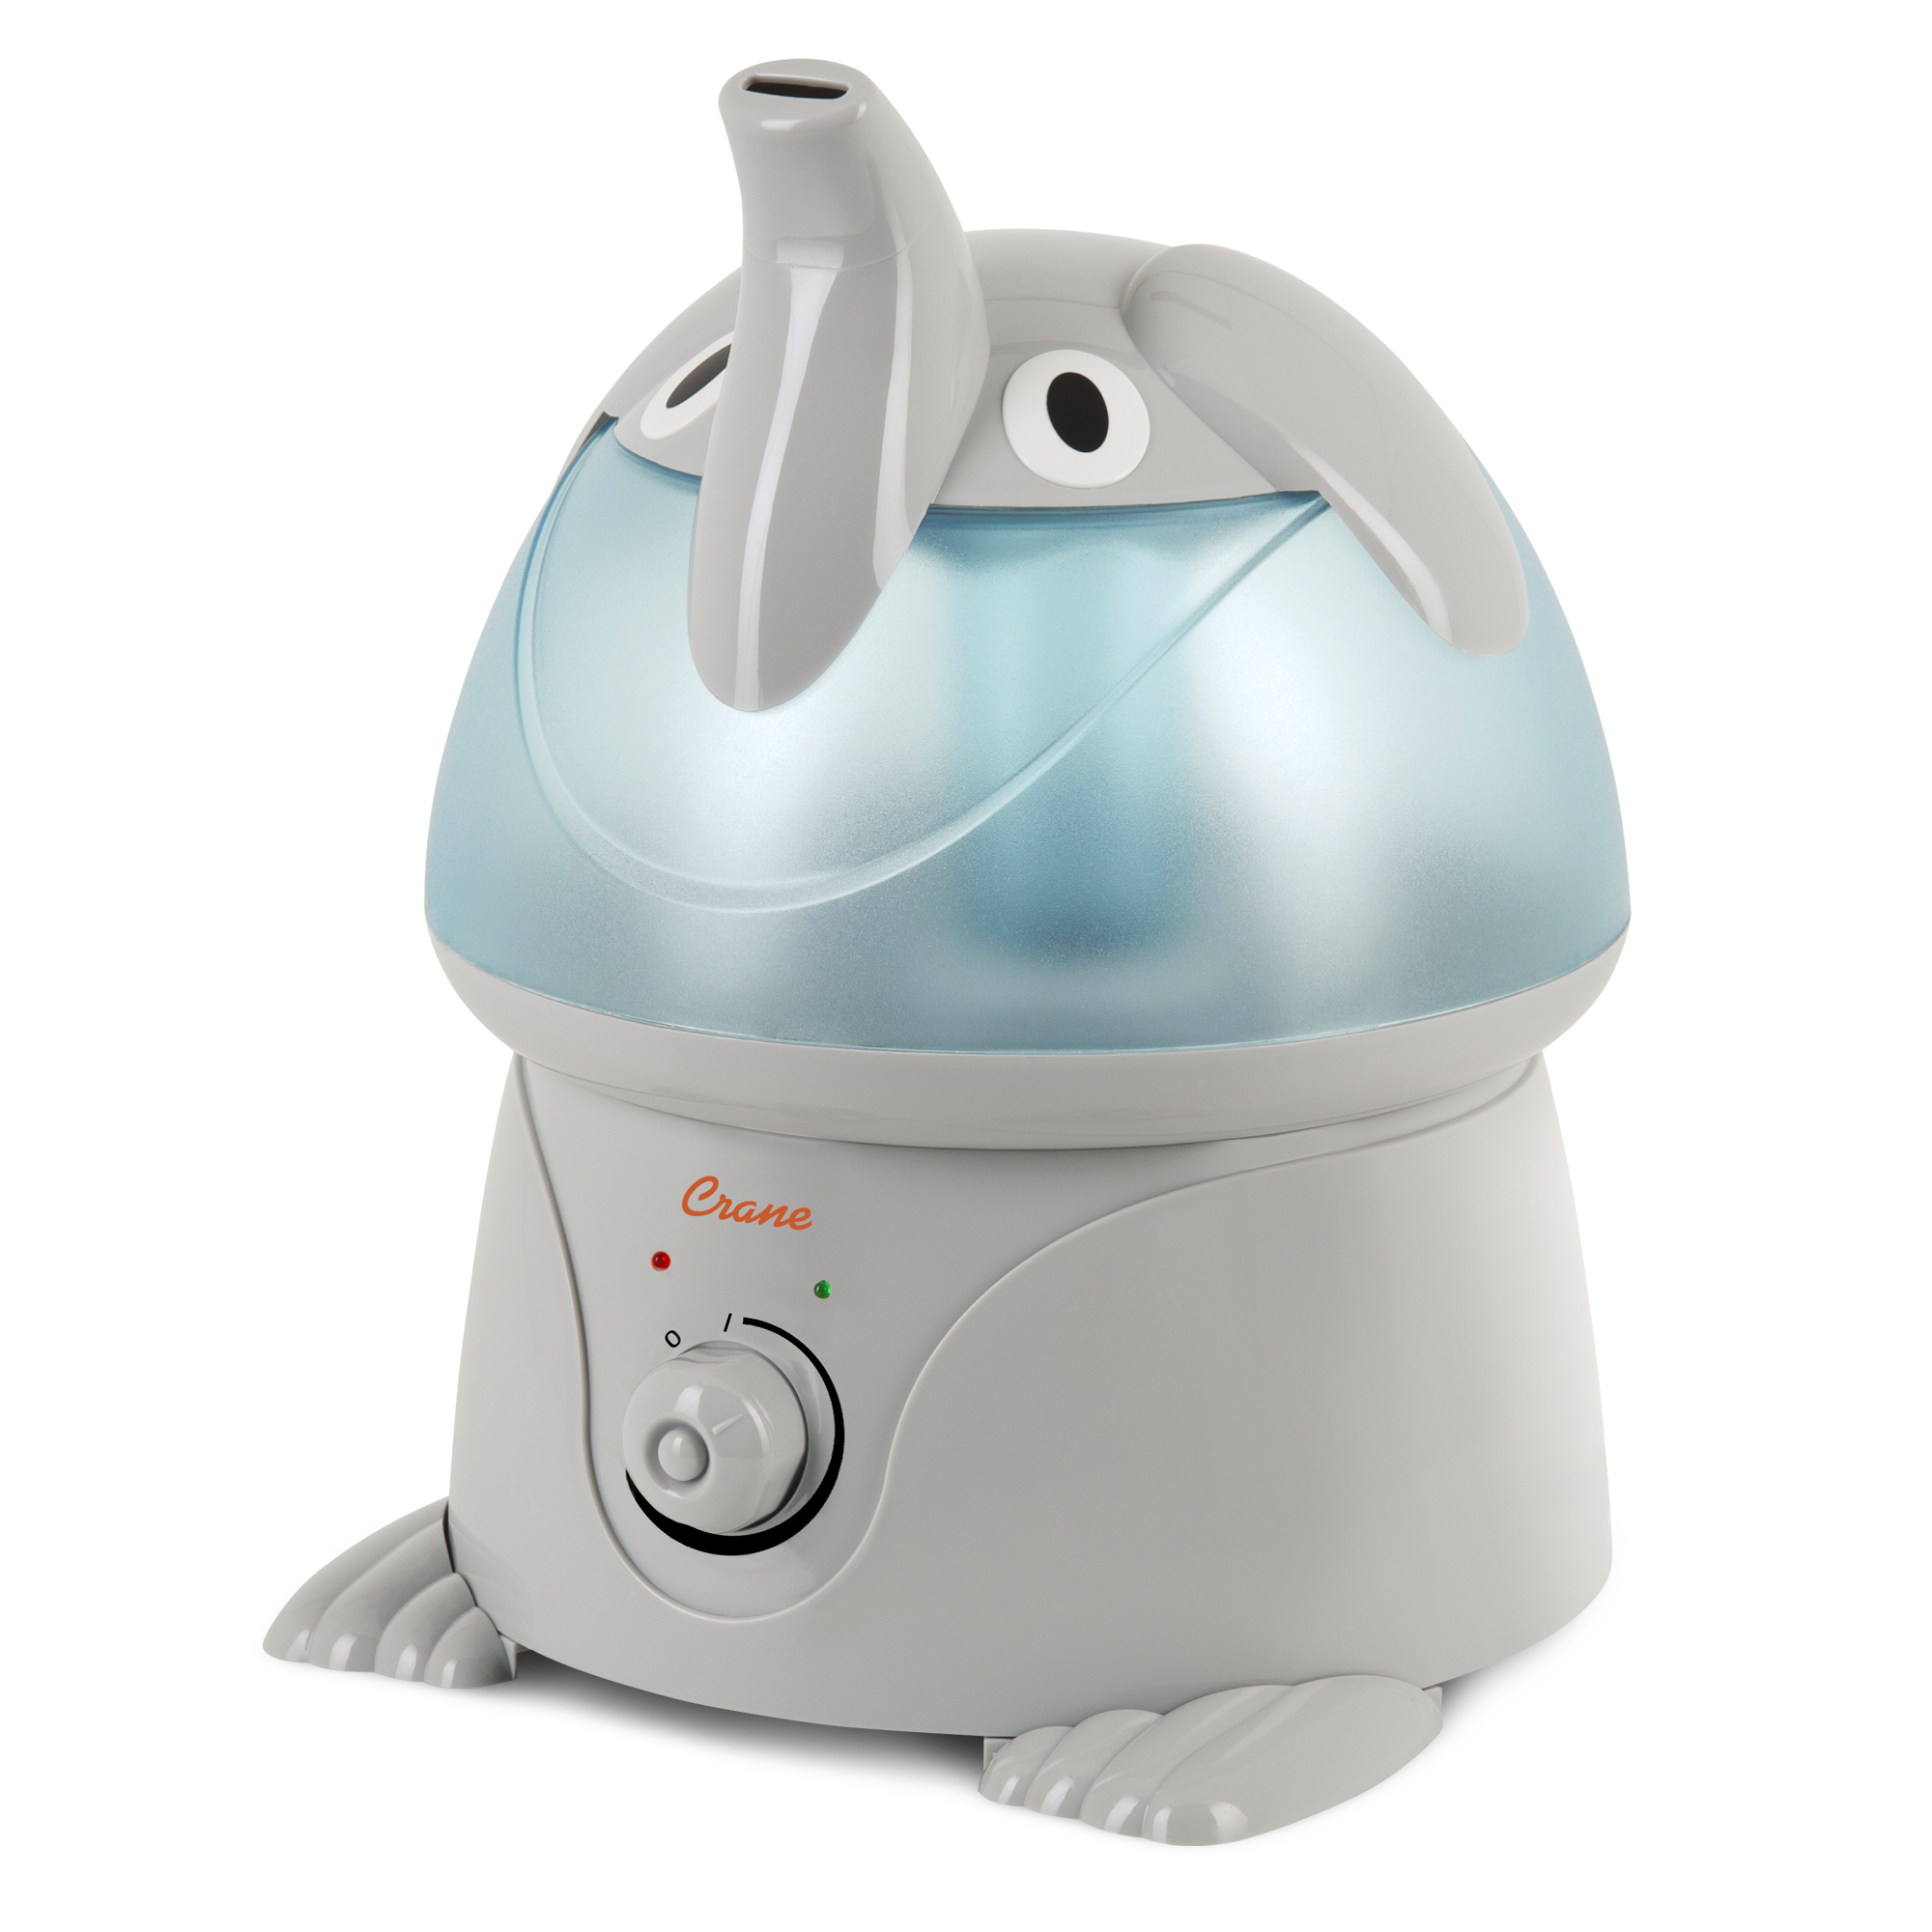 How to Use Humidifiers: Placement, Maintenance & More - Molekule